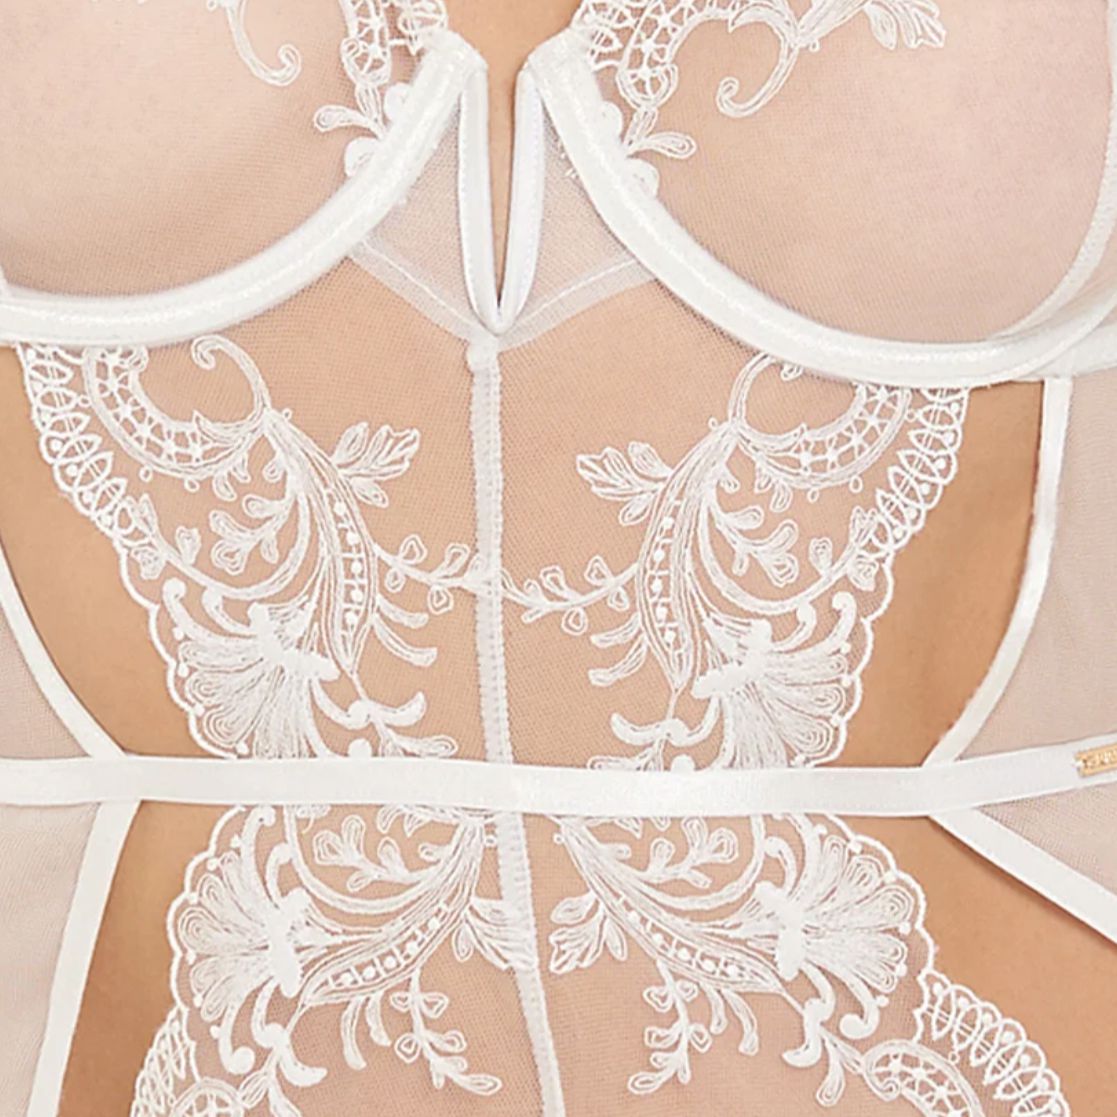 Bluebella Marseille Basque in White 41551-Corsets / Bustiers-Bluebella-Black-34-B-Anna Bella Fine Lingerie, Reveal Your Most Gorgeous Self!